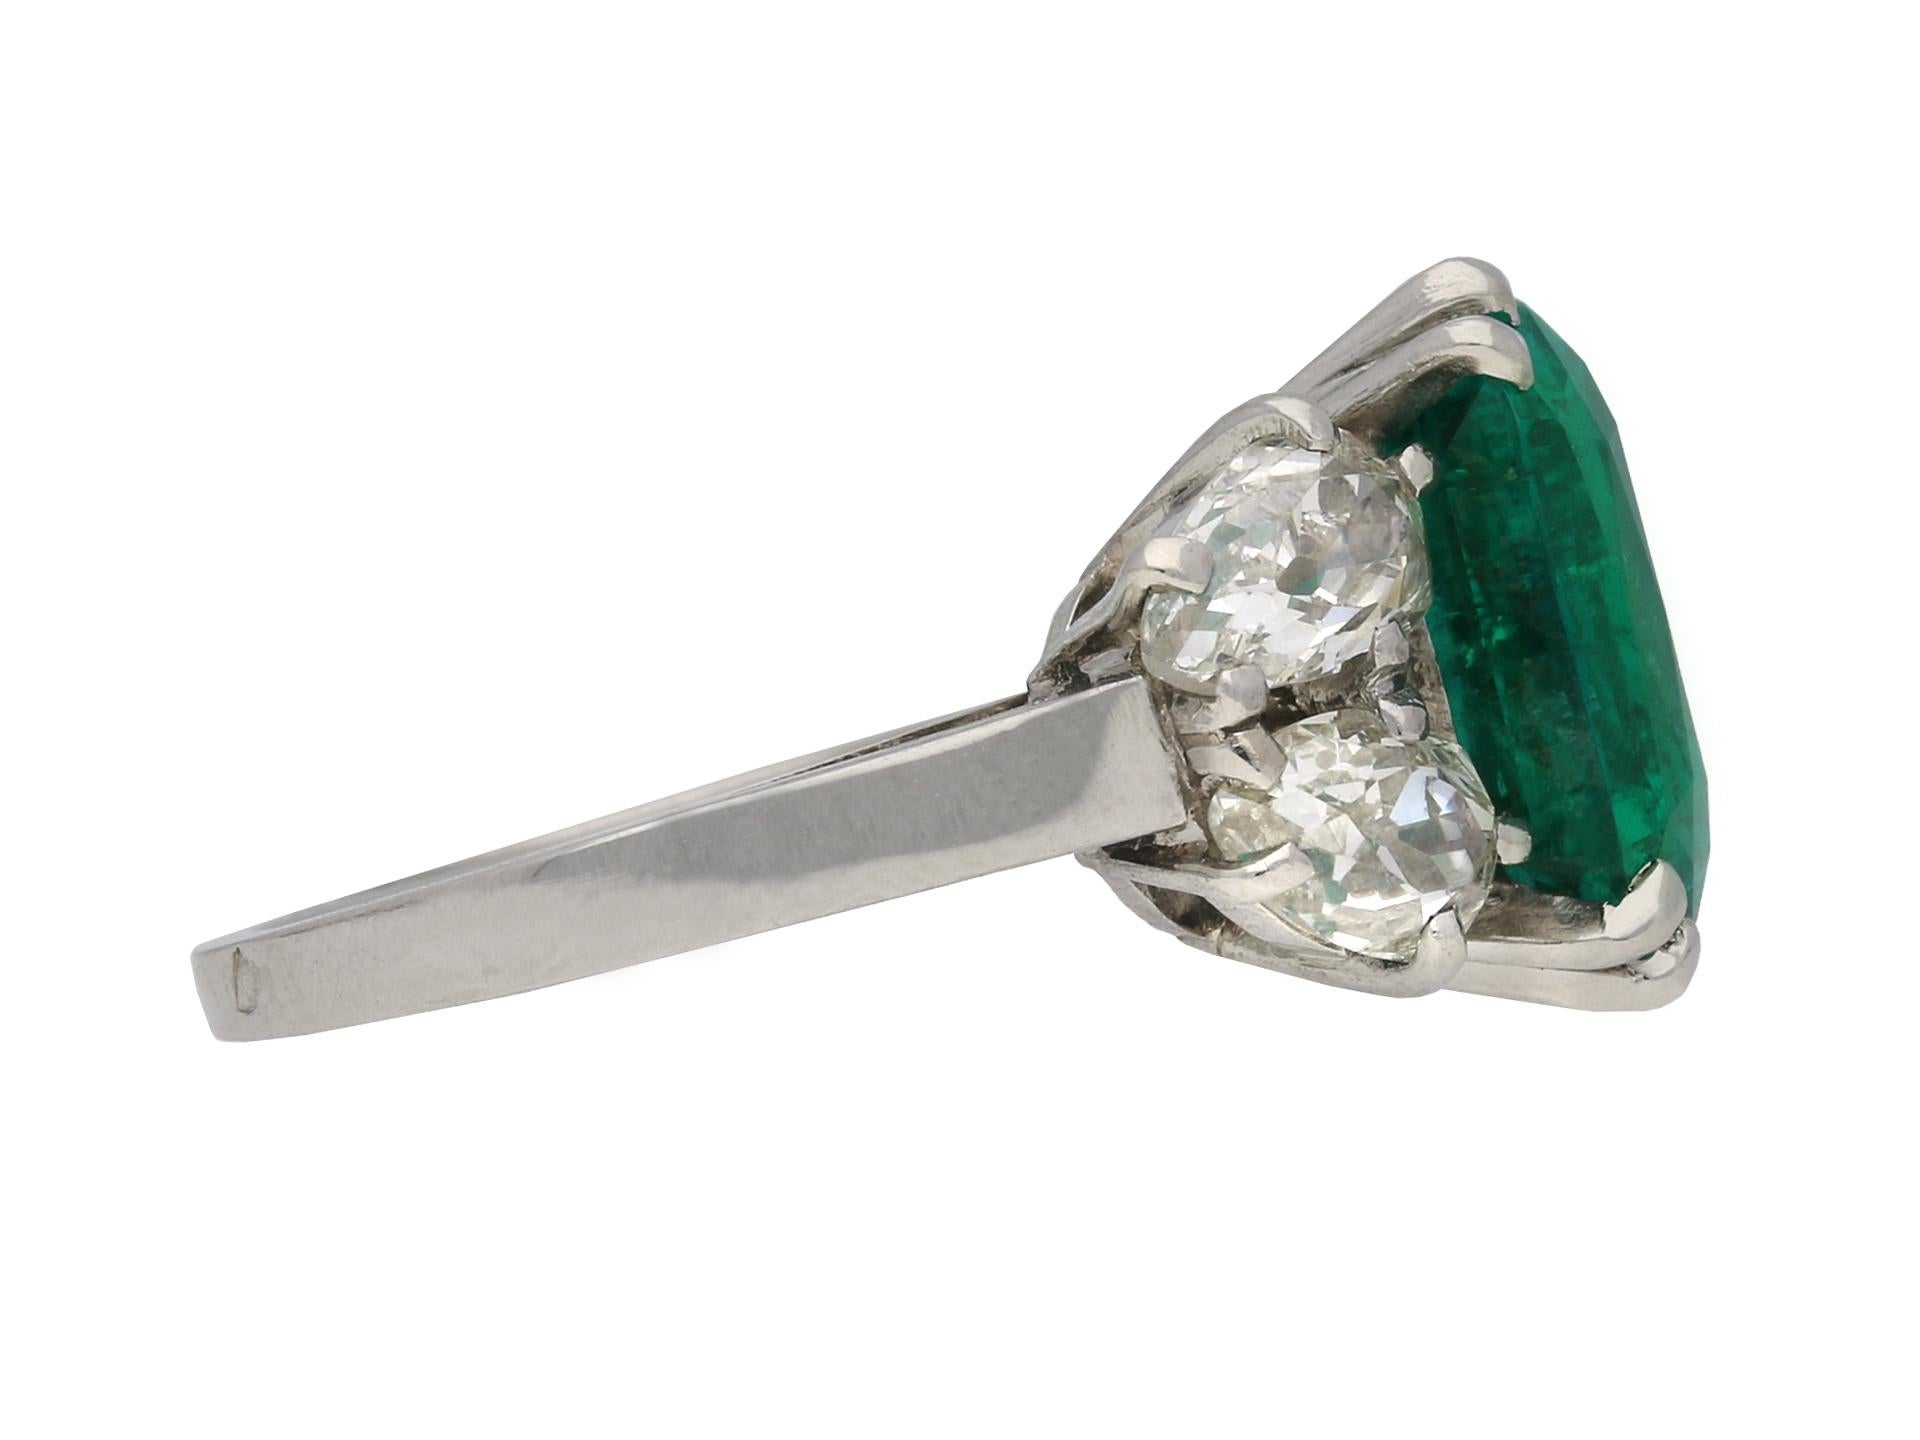 Boucheron Colombian emerald and diamond ring. Centrally set with a cushion shape old mine cut natural Colombian emerald with indications of minor clarity enhancement in an open back claw setting with an approximate weight of 6.20 carats, further